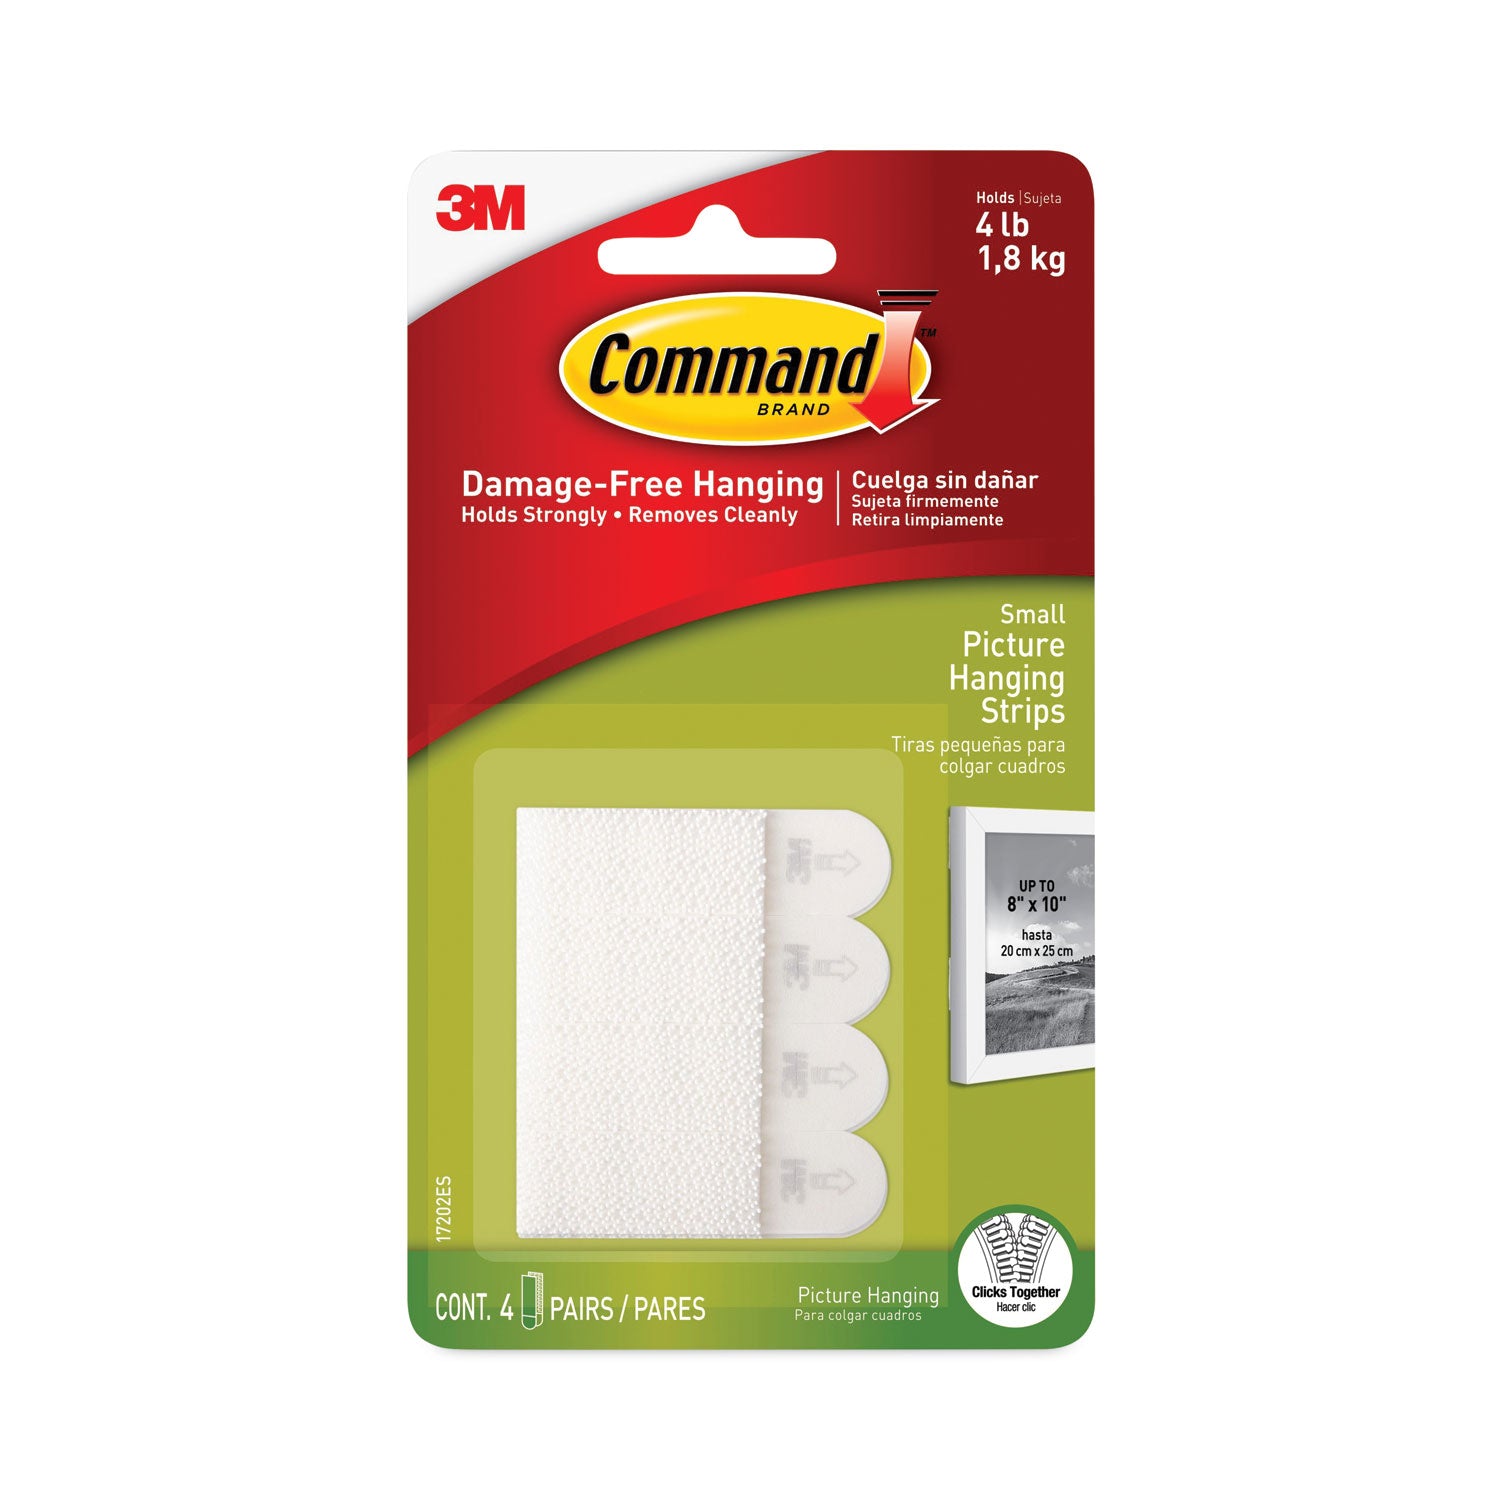 picture-hanging-strips-repositionable-holds-up-to-1-lb-per-pair-063-x-213-white-4-pairs-pack_mmm17202es - 1